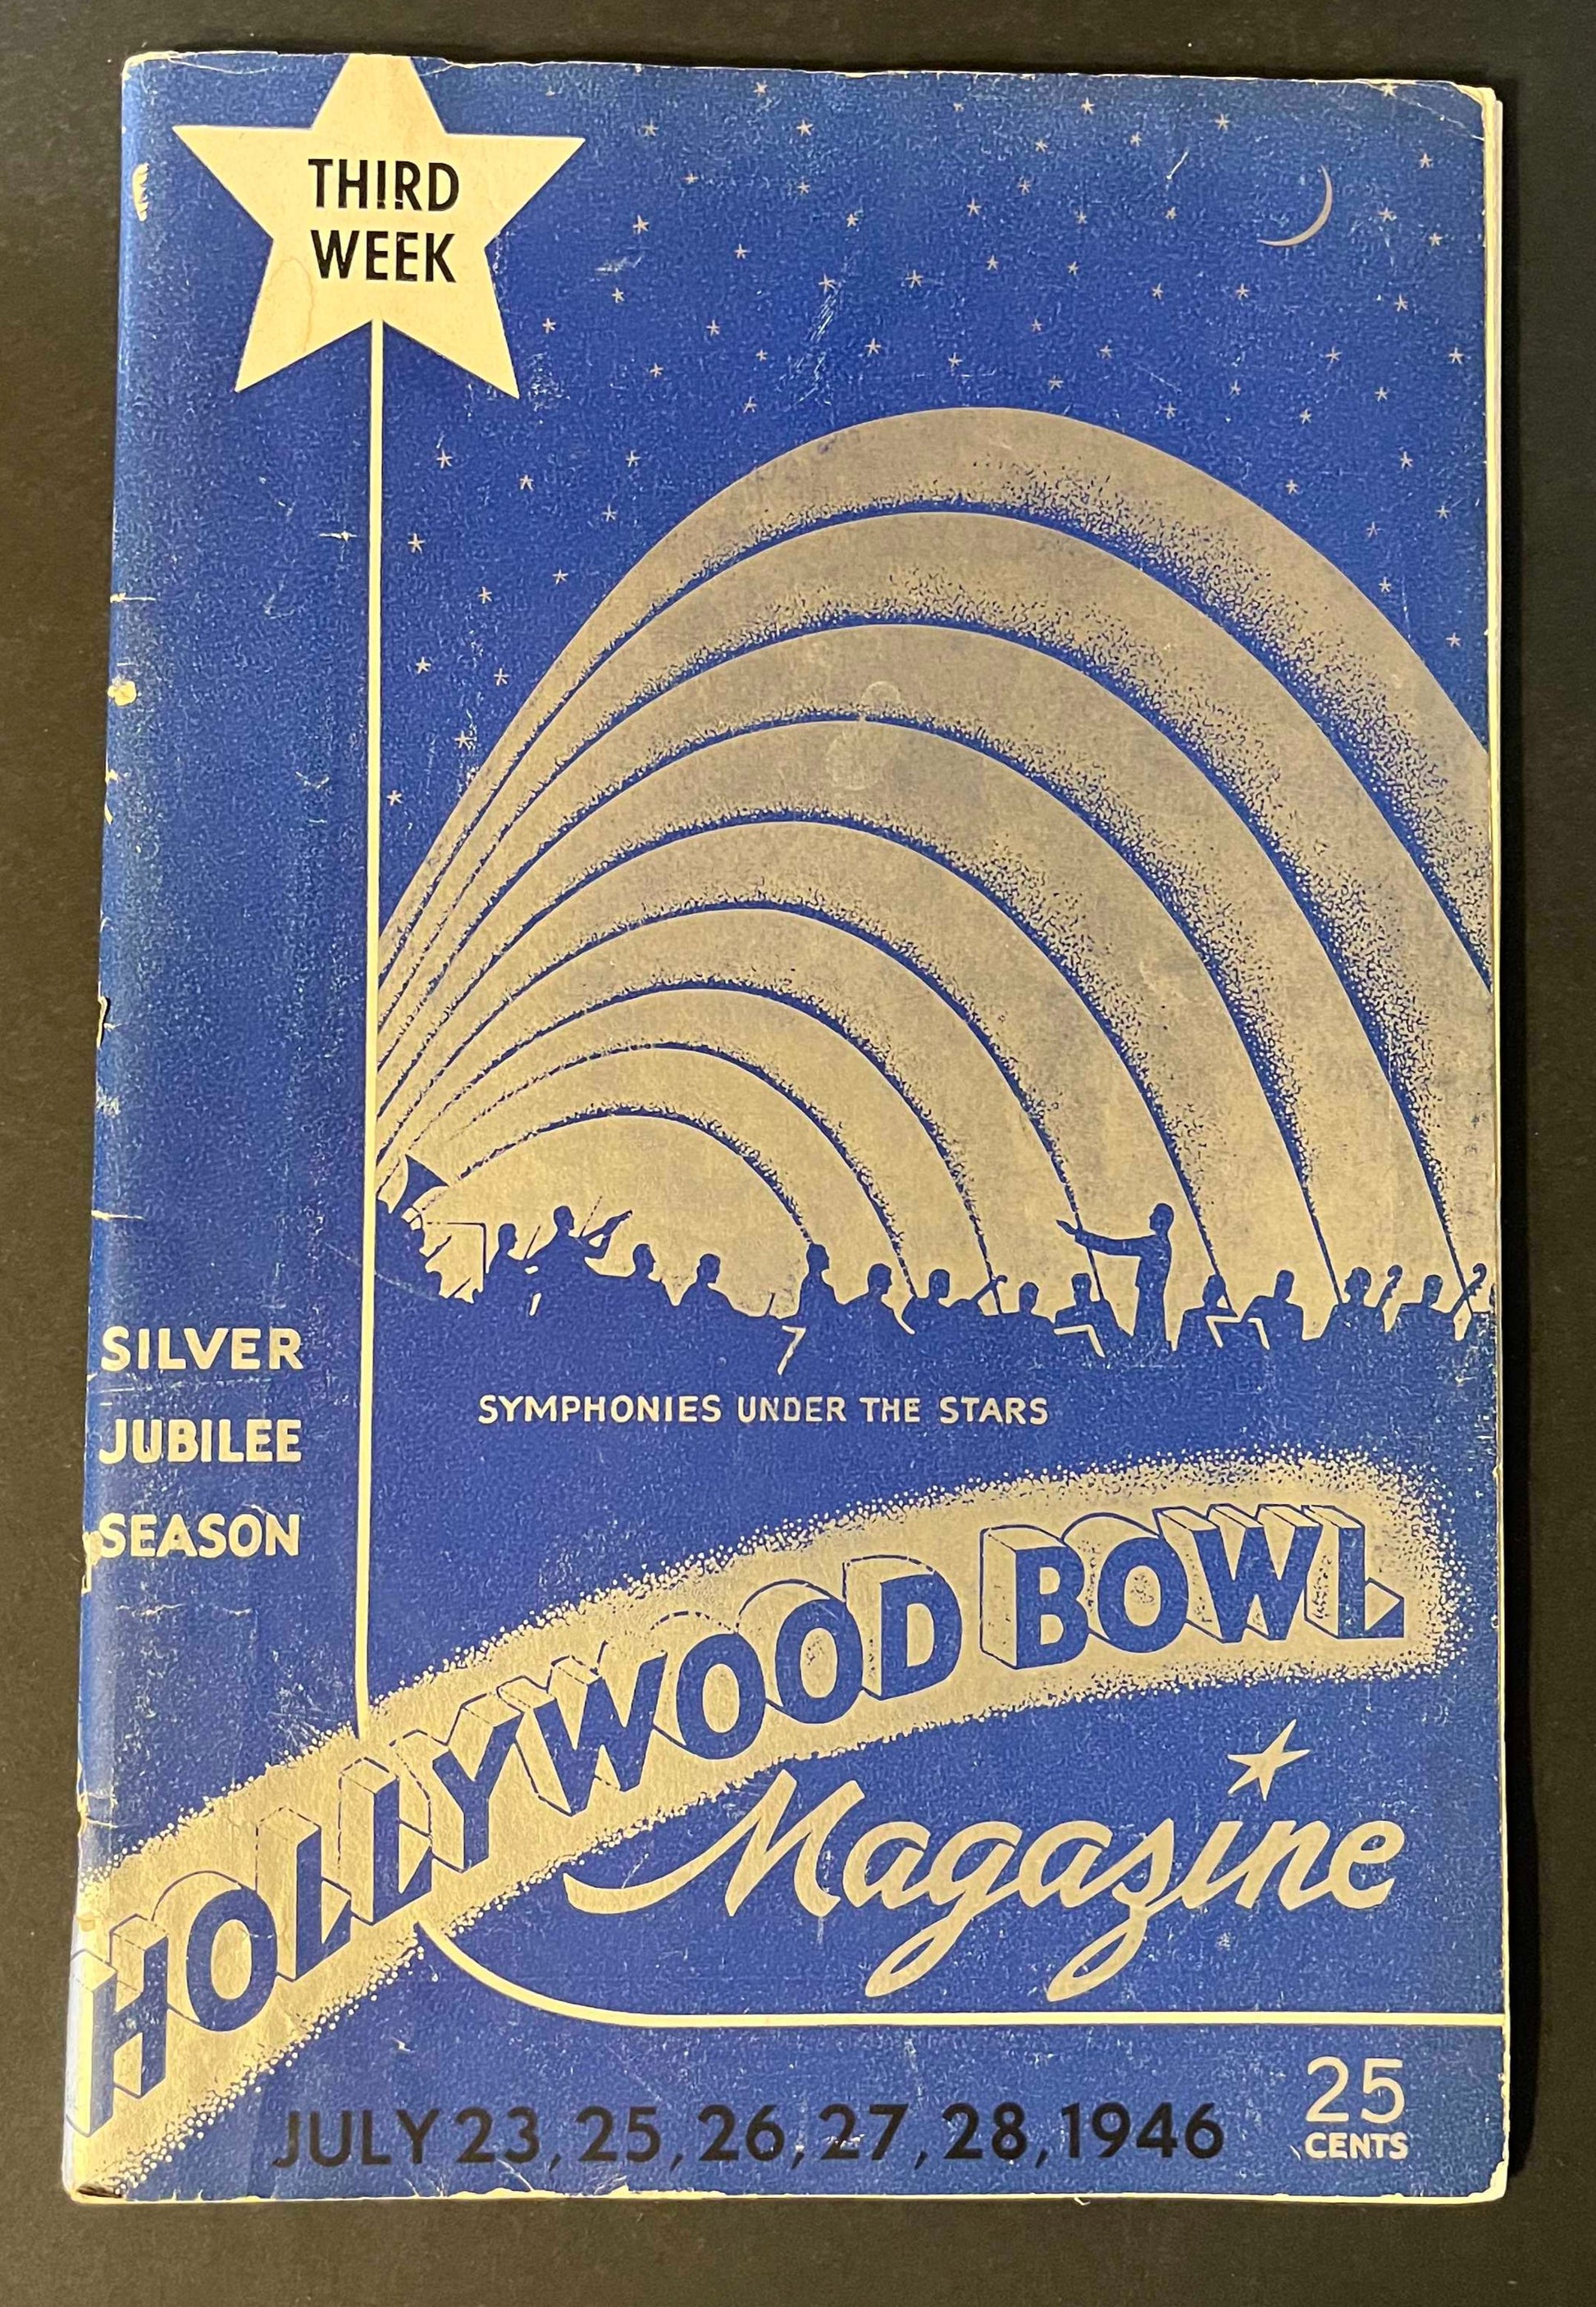 The magazine's cover art is a beautiful nocturnal scene, with stars twinkling above the Hollywood Bowl, capturing the magic of open-air concerts. The image is an invitation to relive the enchanting evenings of music and starlight that define the Hollywood Bowl experience.